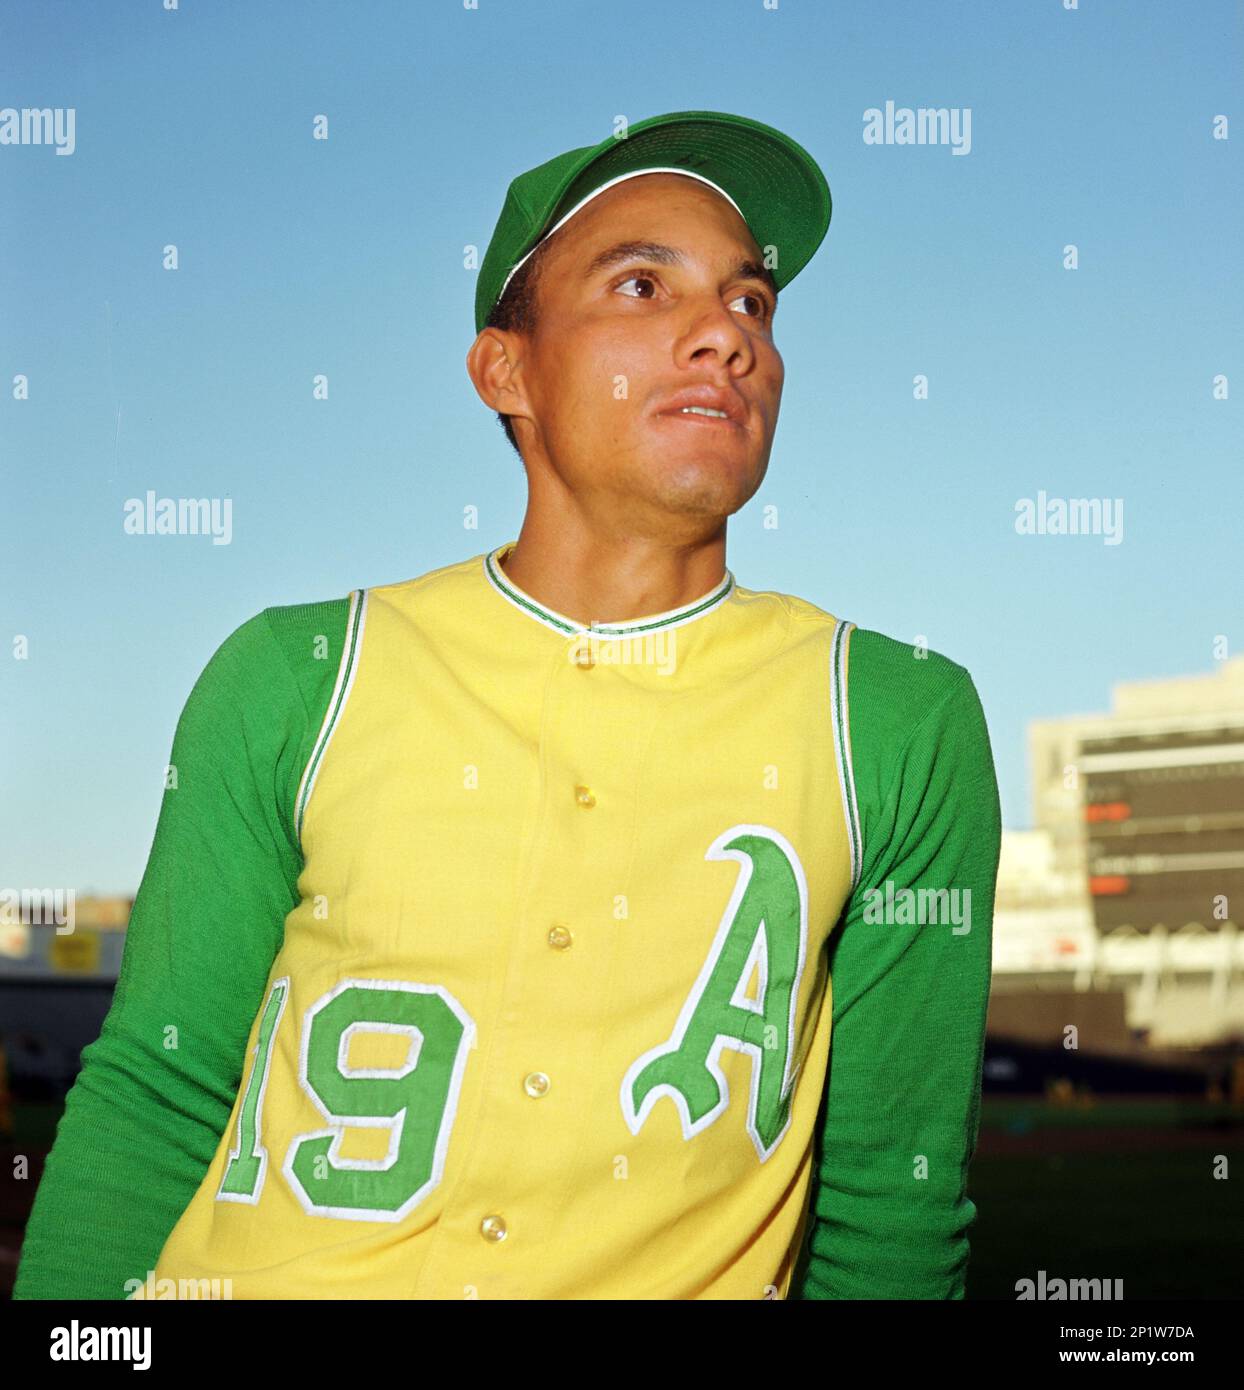 Oakland A's Bert Campaneris (19) during a game from his 1966 season with  the Oakland A's against the New York Yankees at Yankee Stadium in the  Bronx, New York. Bert Campaneris played